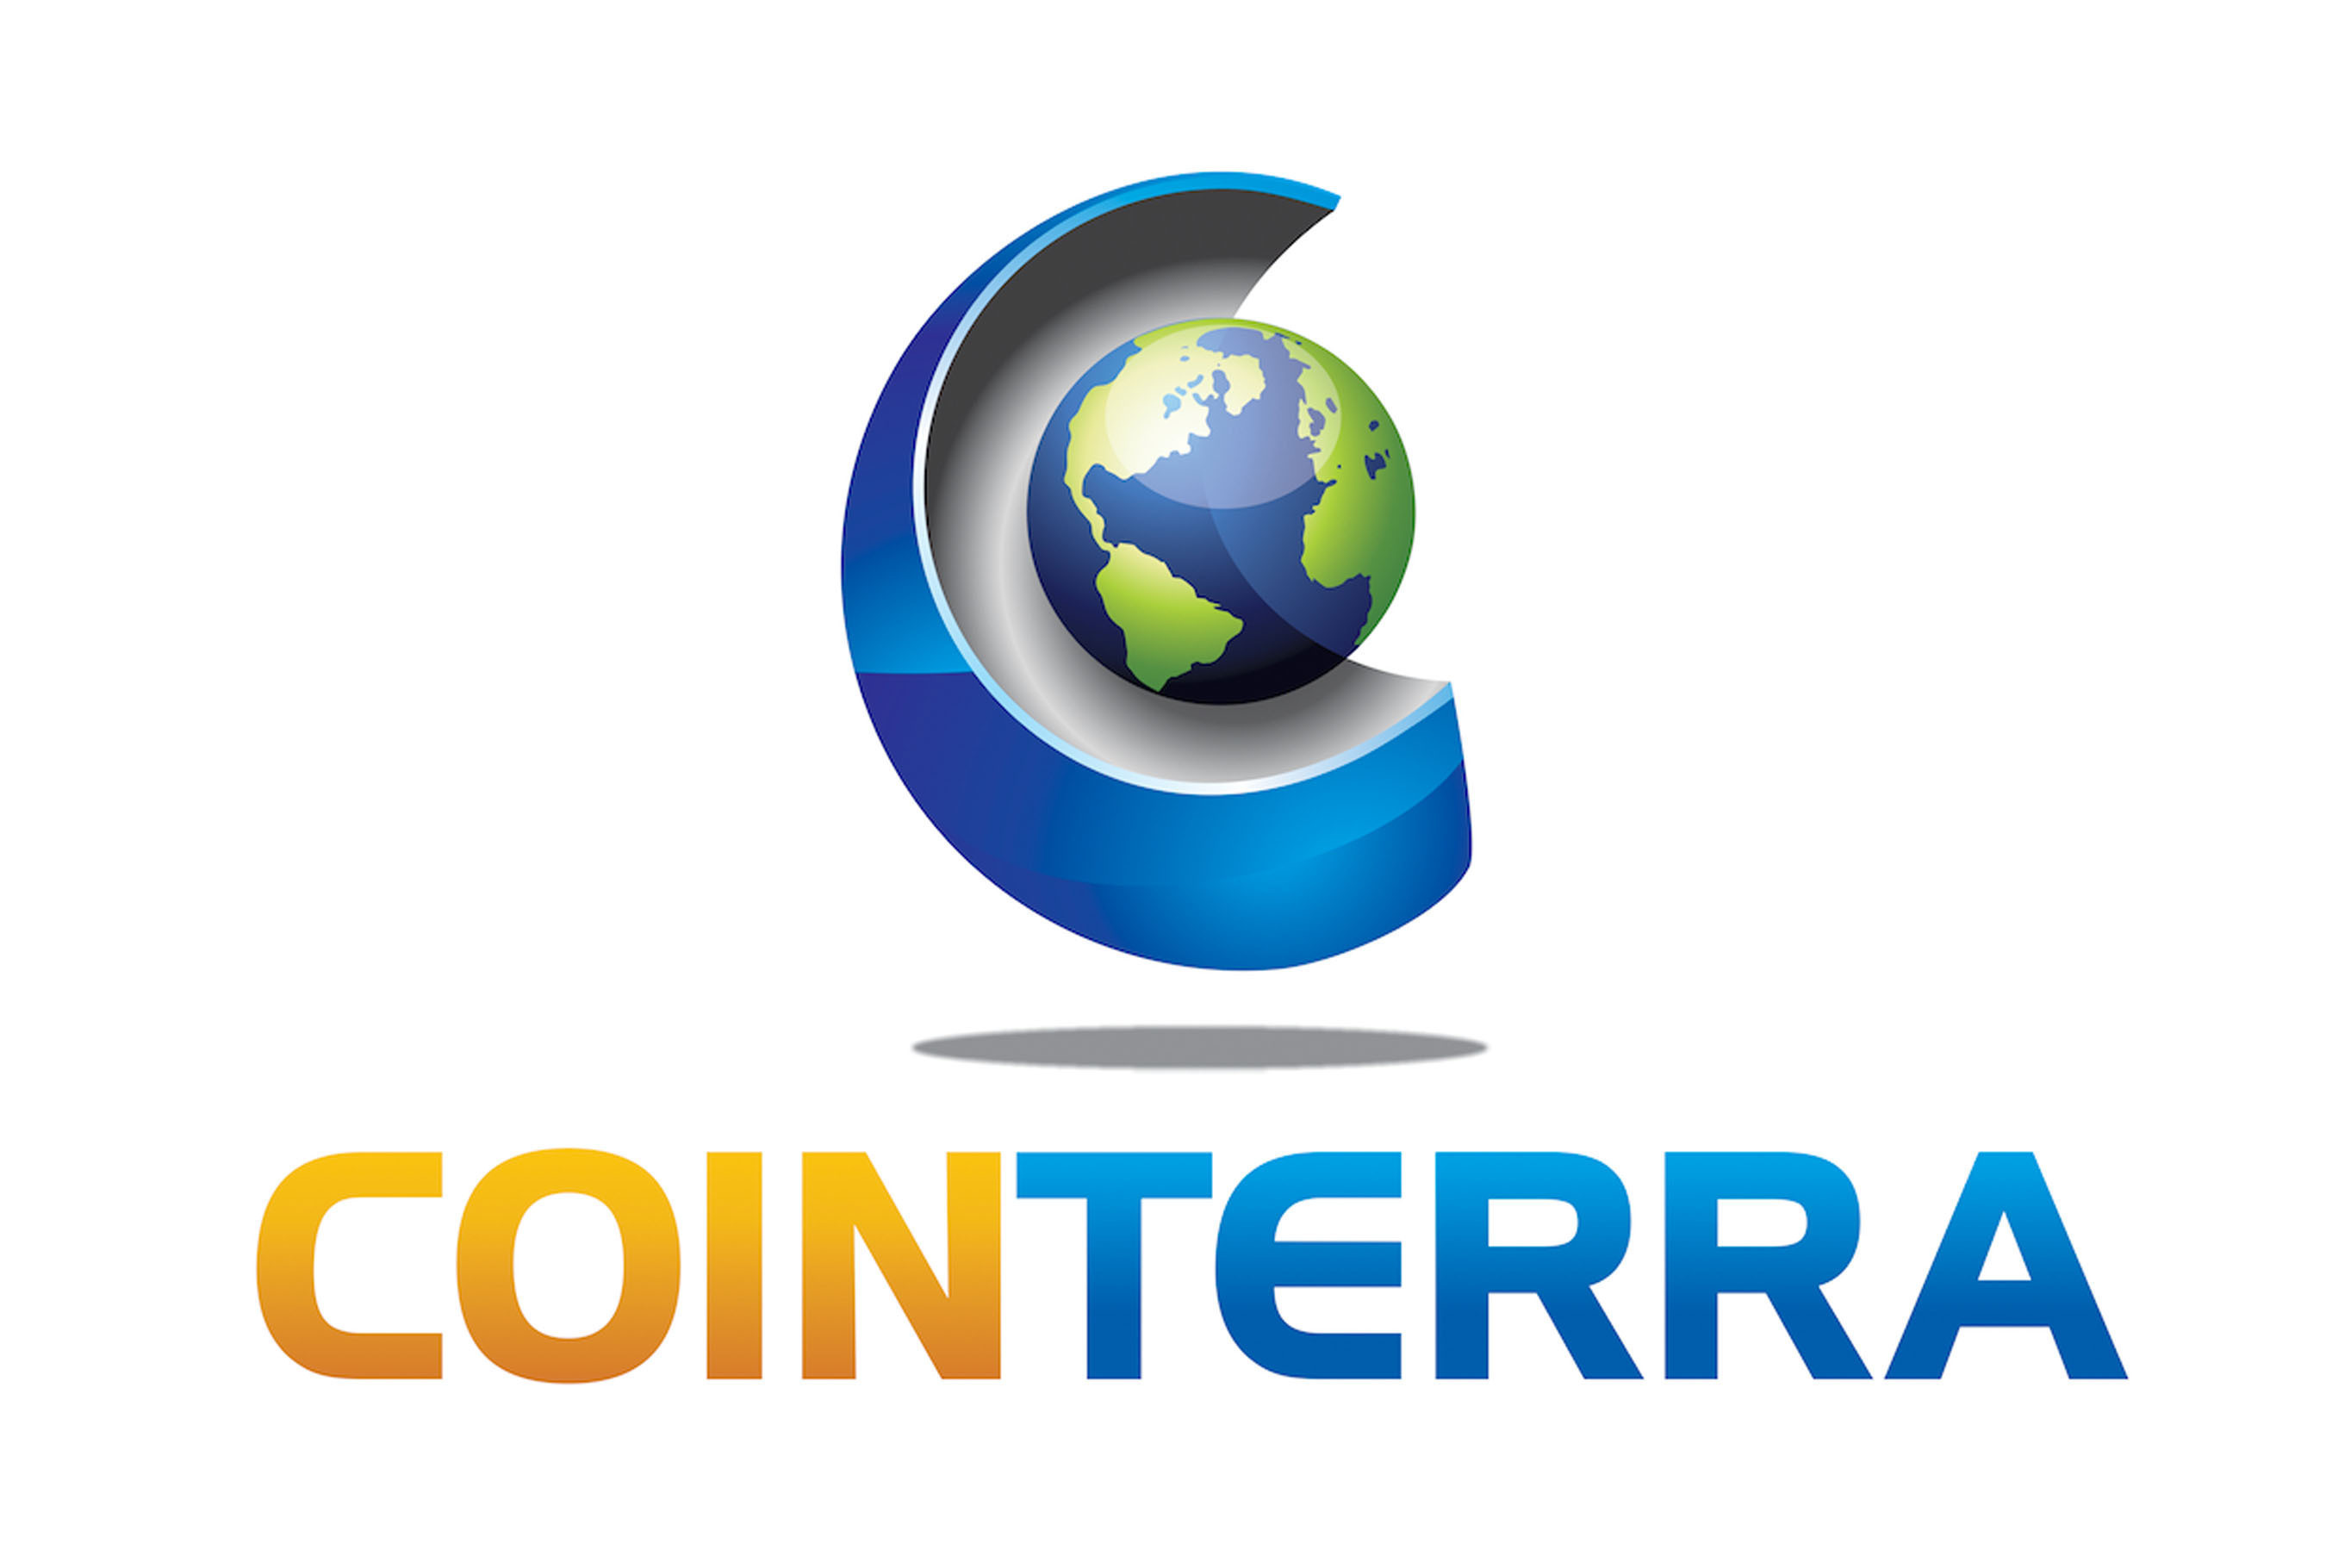 CoinTerra is currently one of the fastest-growing technology startups in the world. CoinTerra designs and produces best-in-class ASIC processors and systems for high-performance financial technology applications, with an initial focus on cryptocurrency and the Bitcoin ecosystem. Our state-of-the-art design methodologies and advanced architectures enable the delivery of Bitcoin mining solutions with the highest performance ASICs available on the market today. CoinTerra. Inc. http://cointerra.com. (PRNewsFoto/CoinTerra) (PRNewsFoto/COINTERRA)